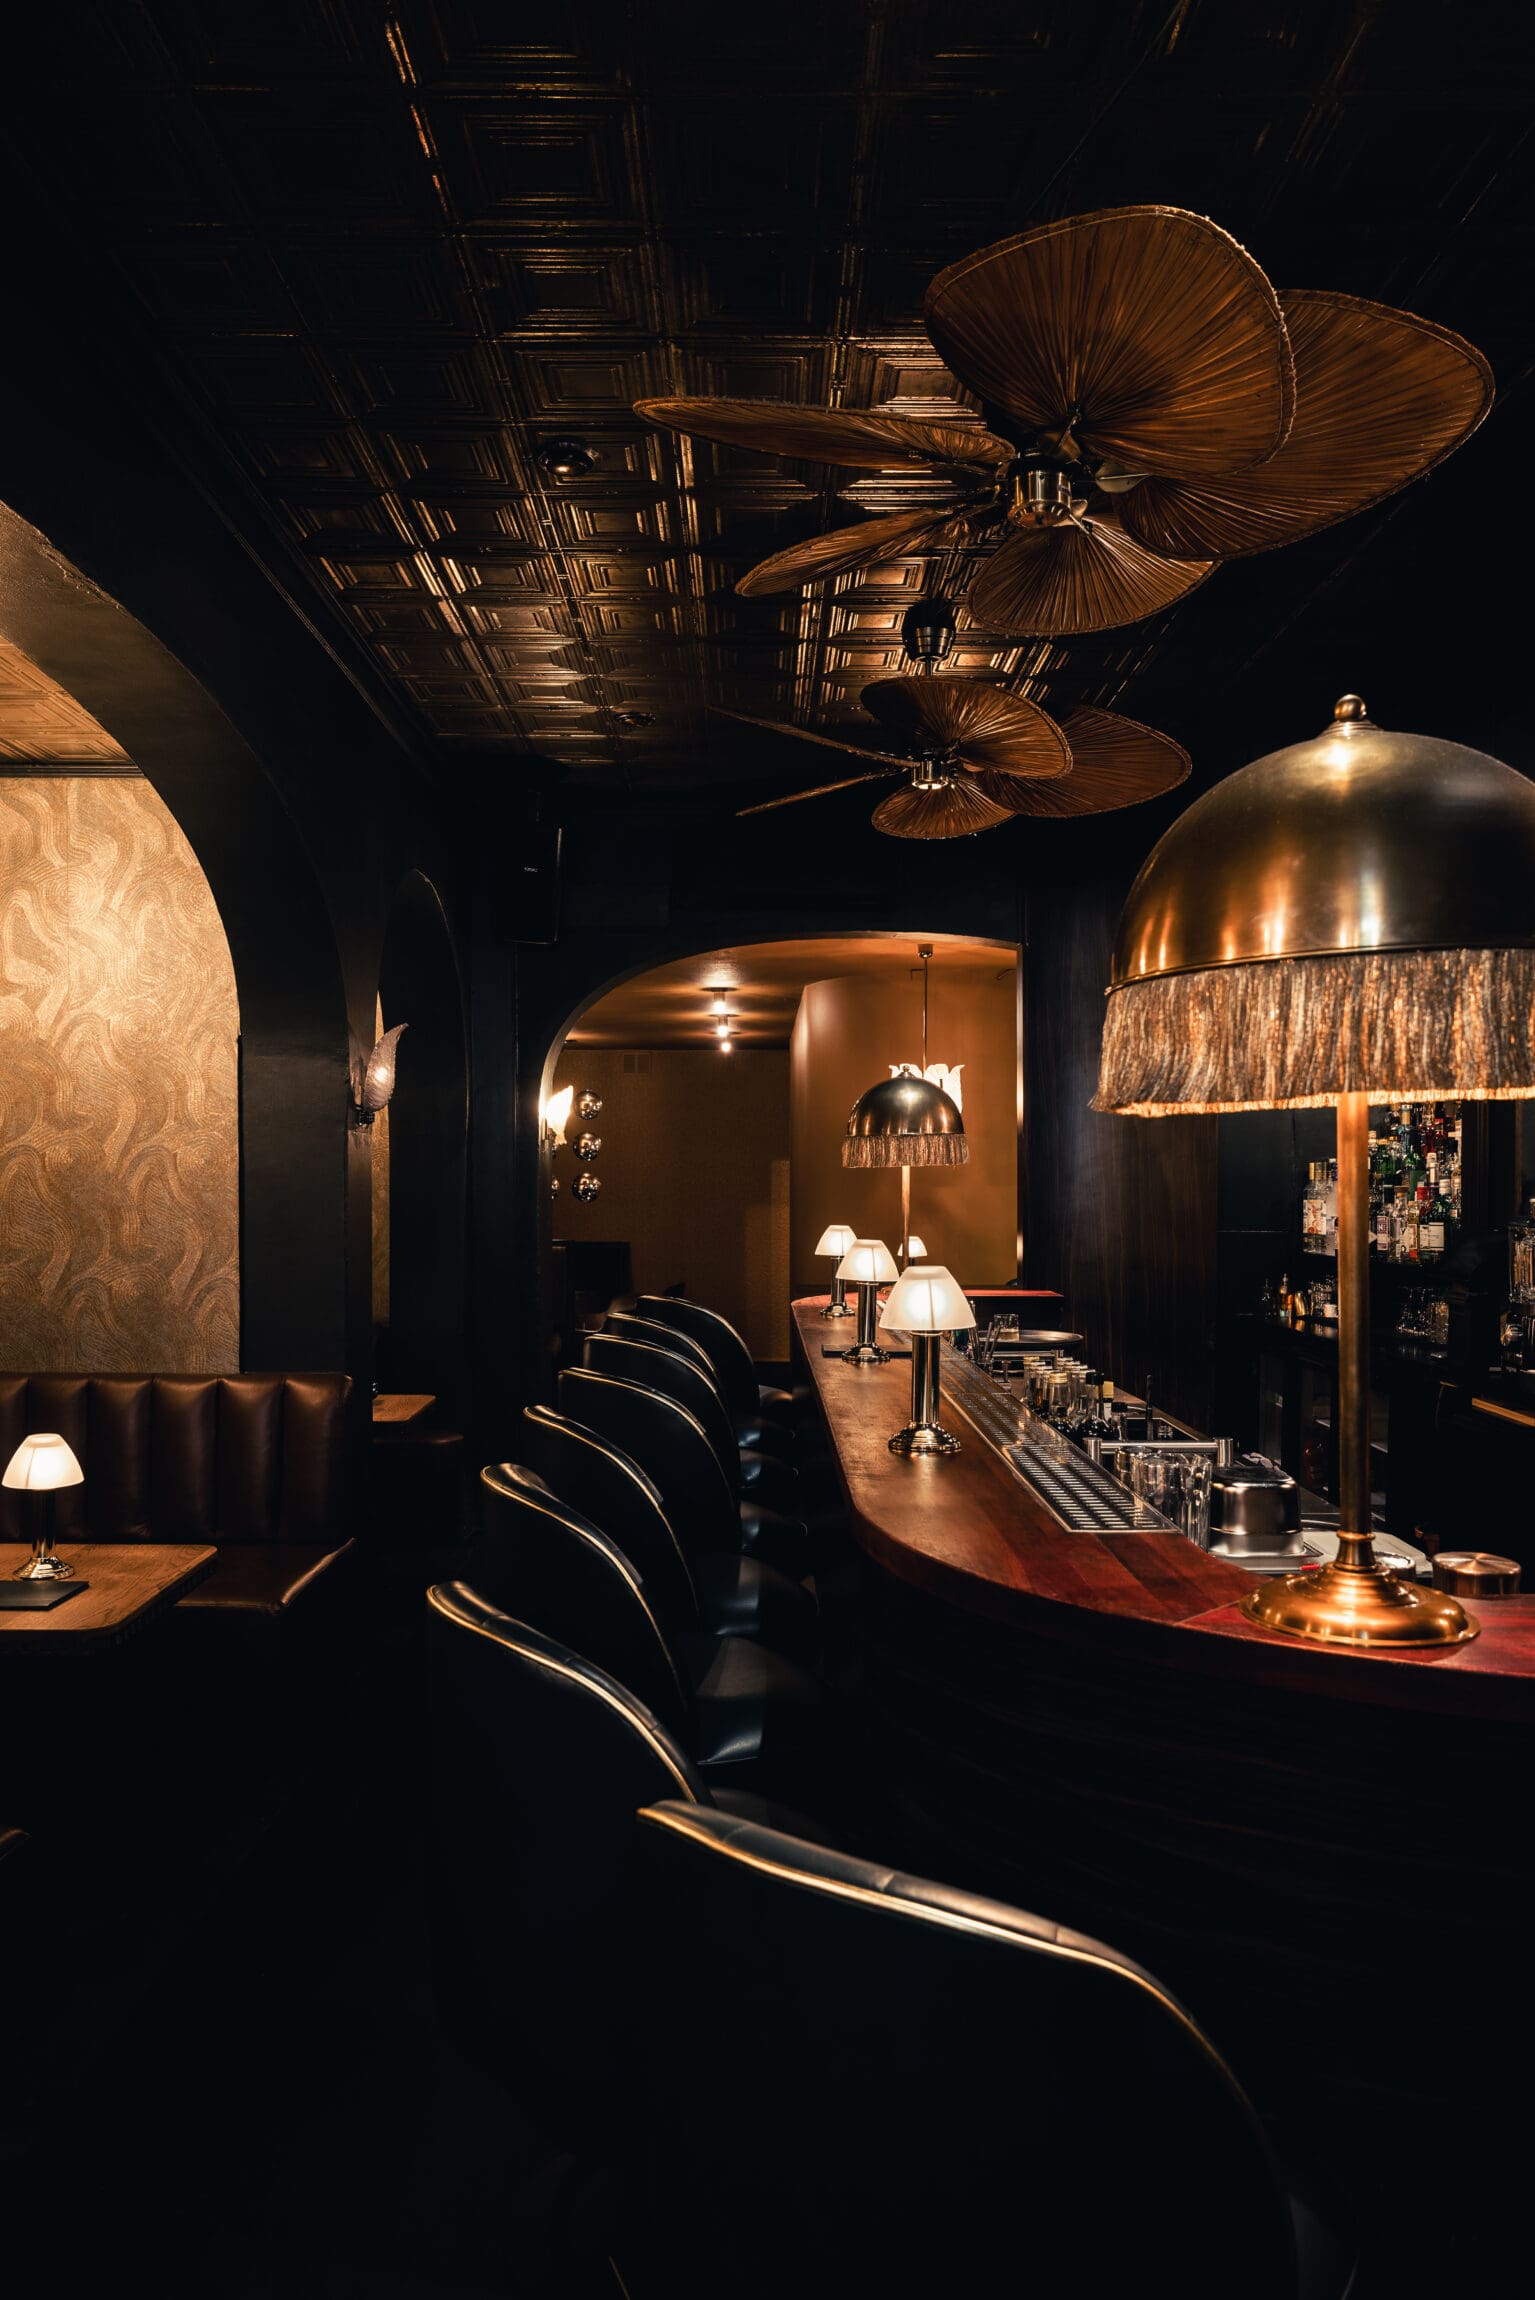 The best bars in Amsterdam | A dark wooded curved bar has lamps and fans above.